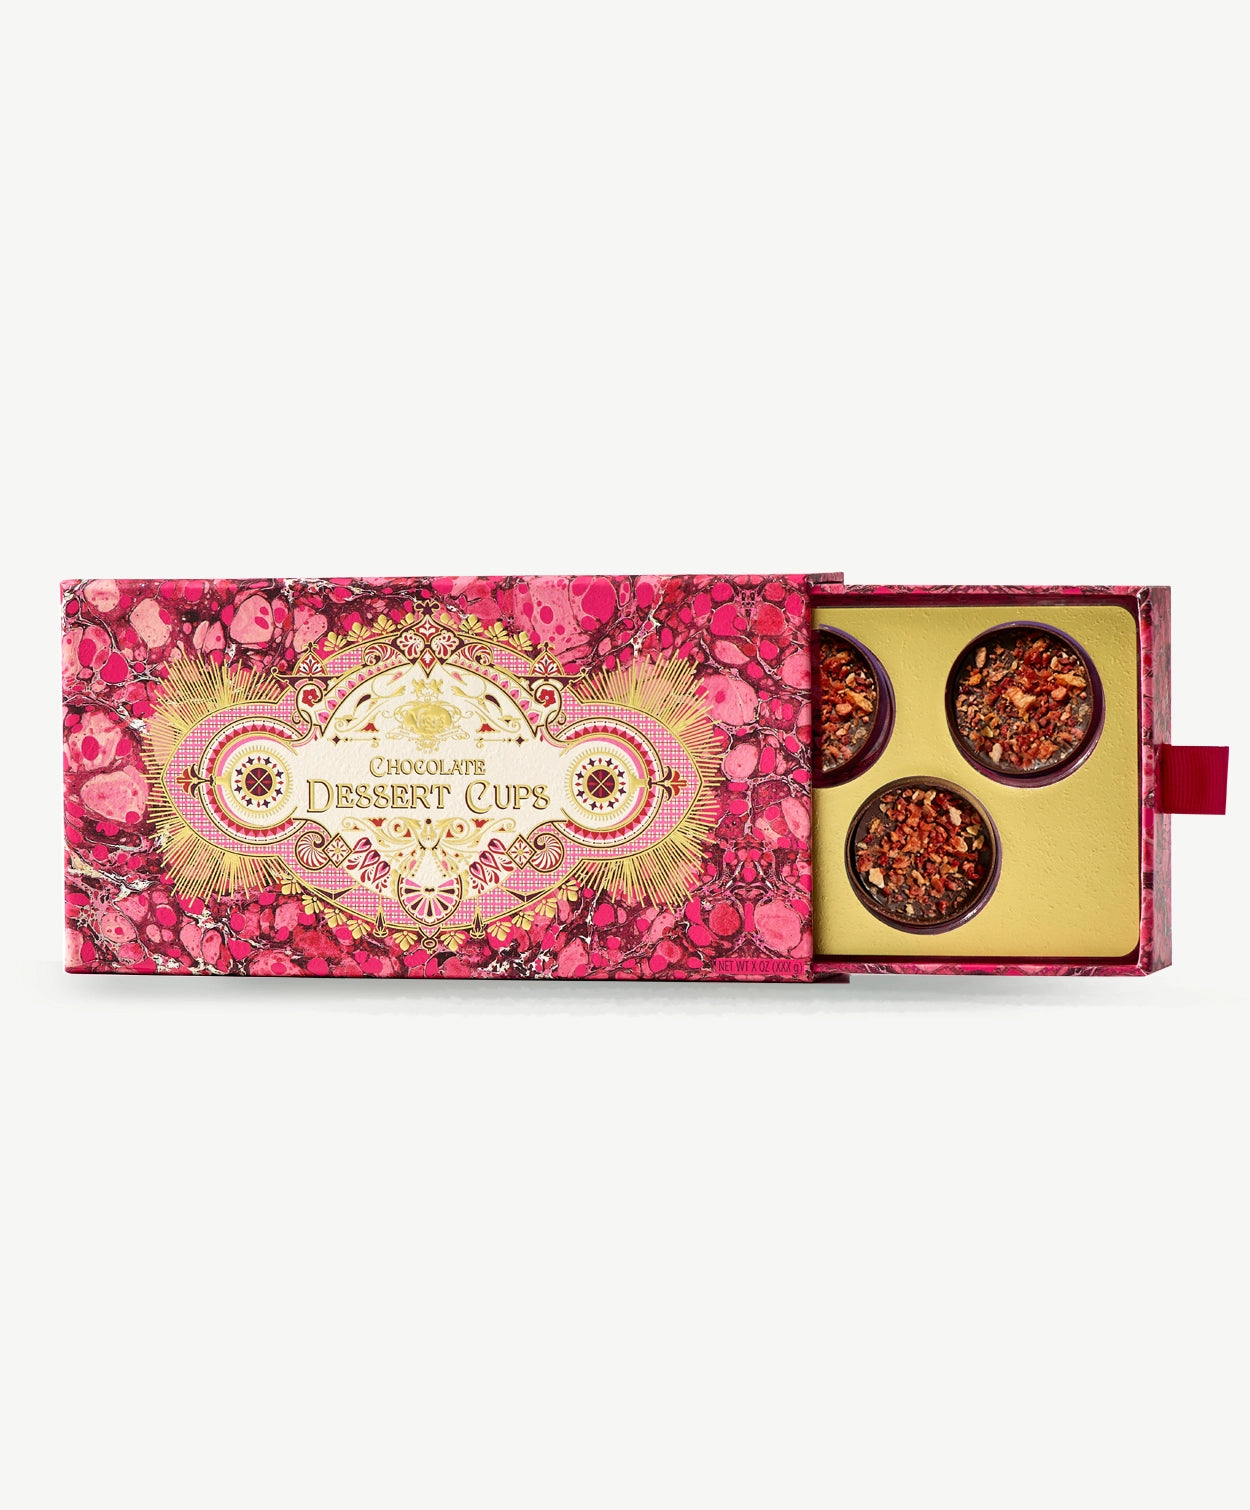 An extravagant pink and gold box is slid open to reveal champagne dessert cups adorned with dried dragon fruit